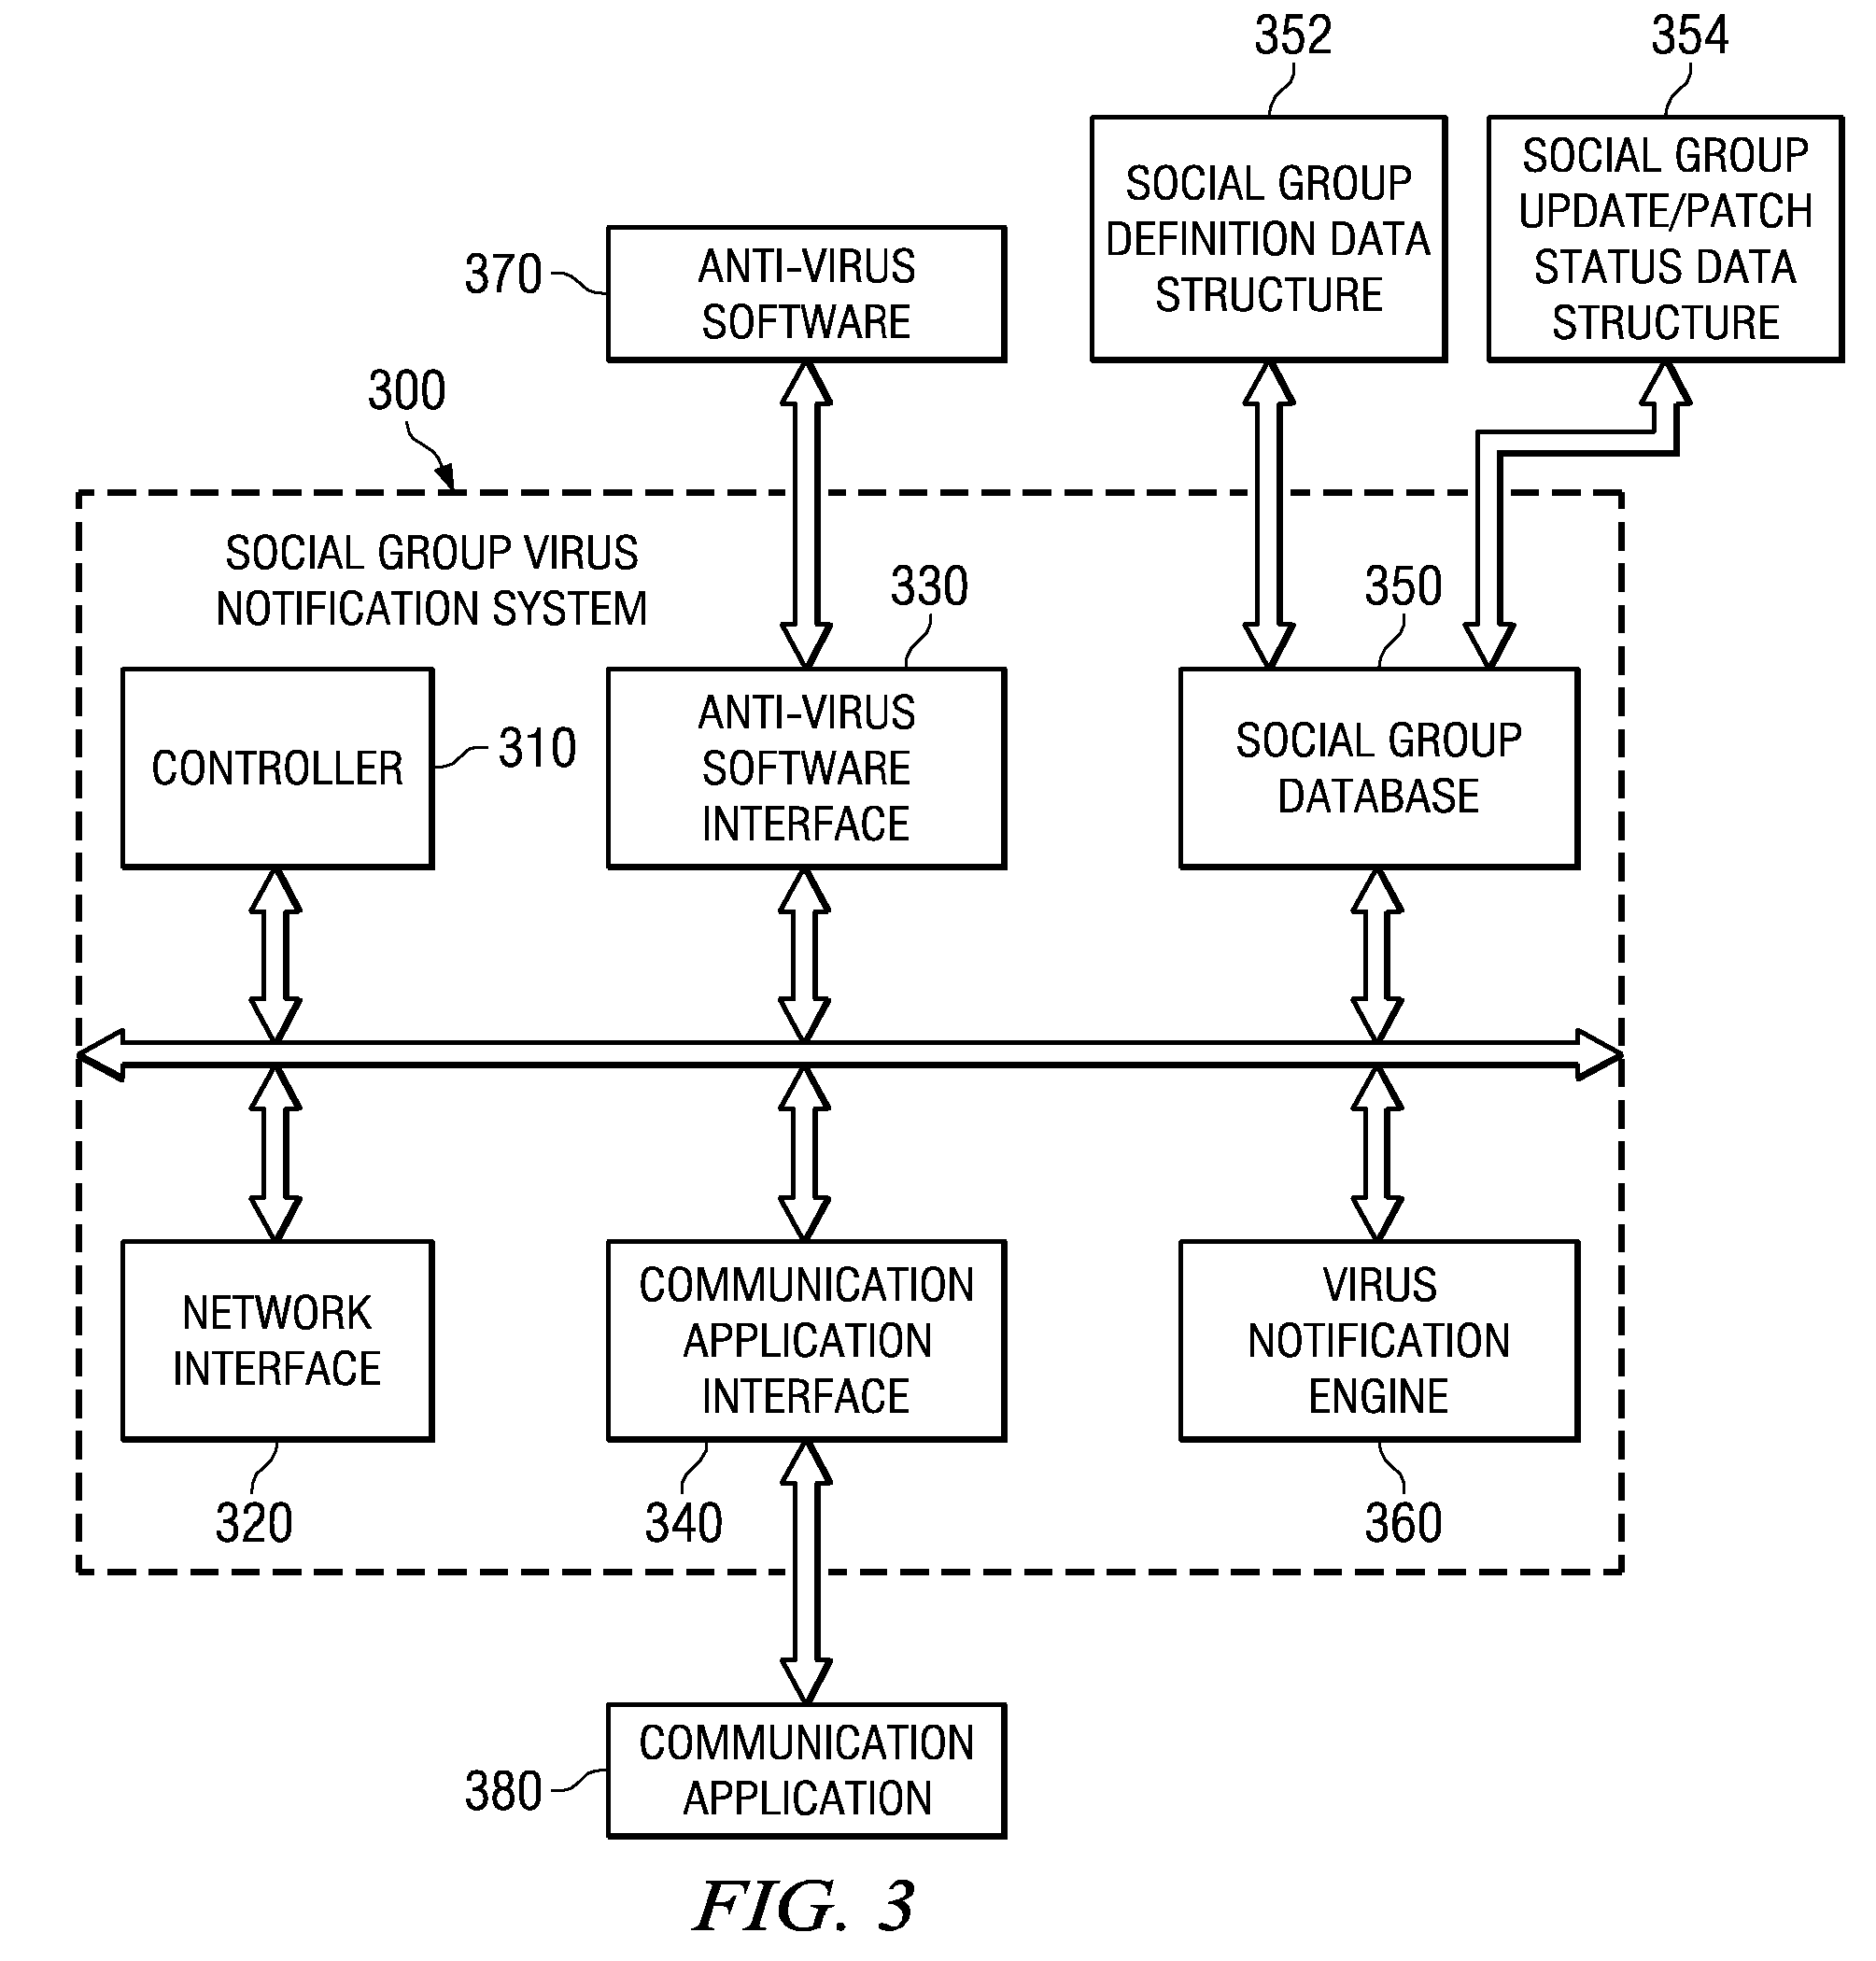 System and Method for Virus Notification Based on Social Groups